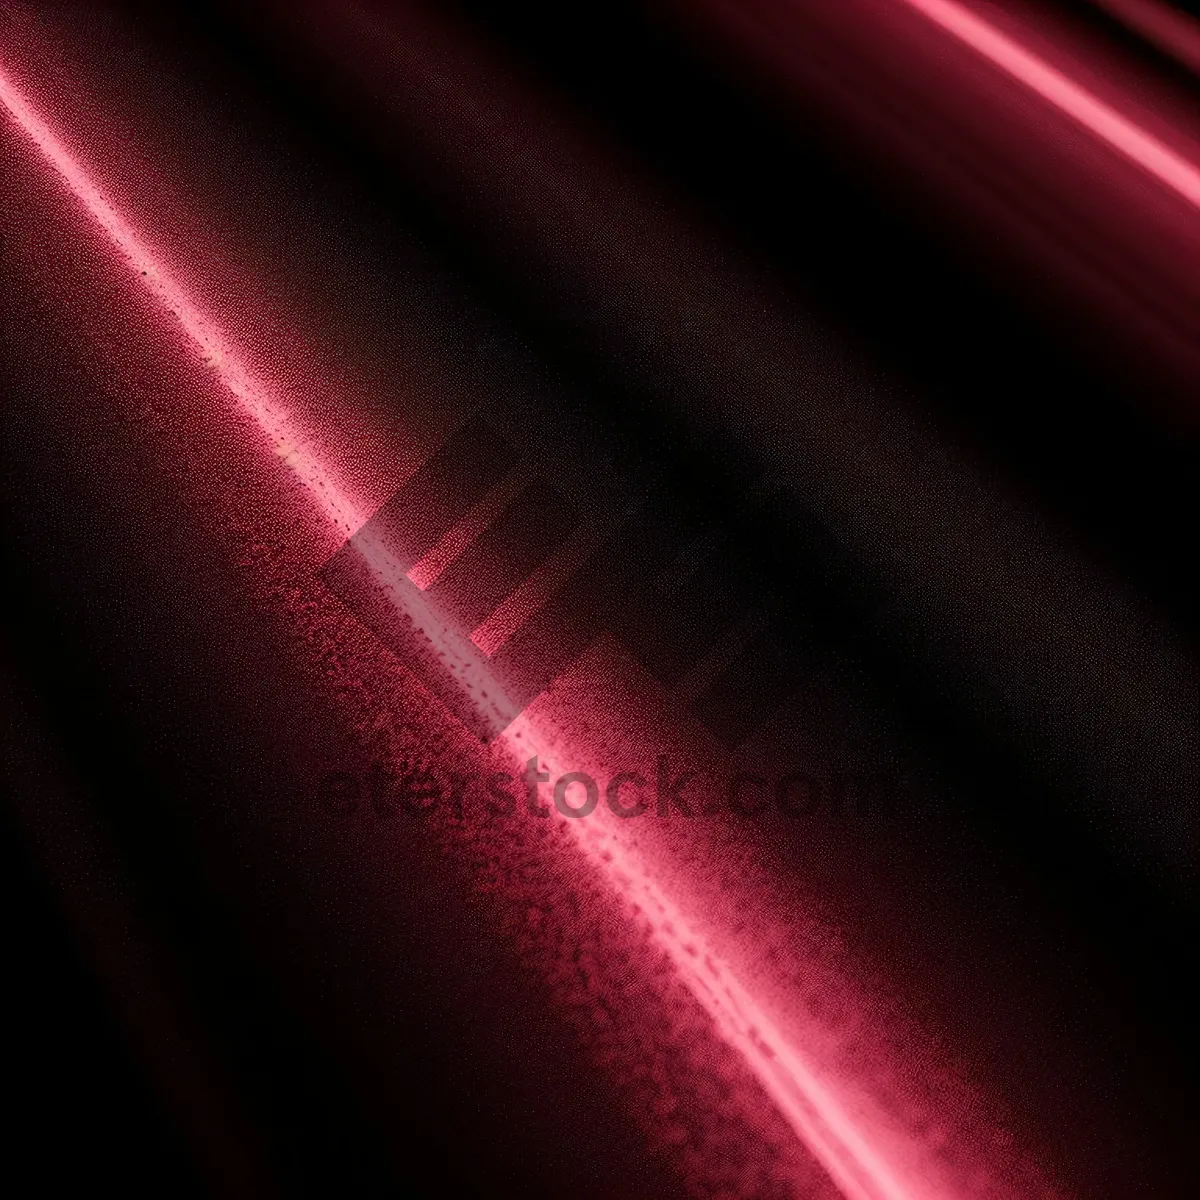 Picture of Vibrant Laser Light Patterns: A Futuristic Blend of Smooth Chaos